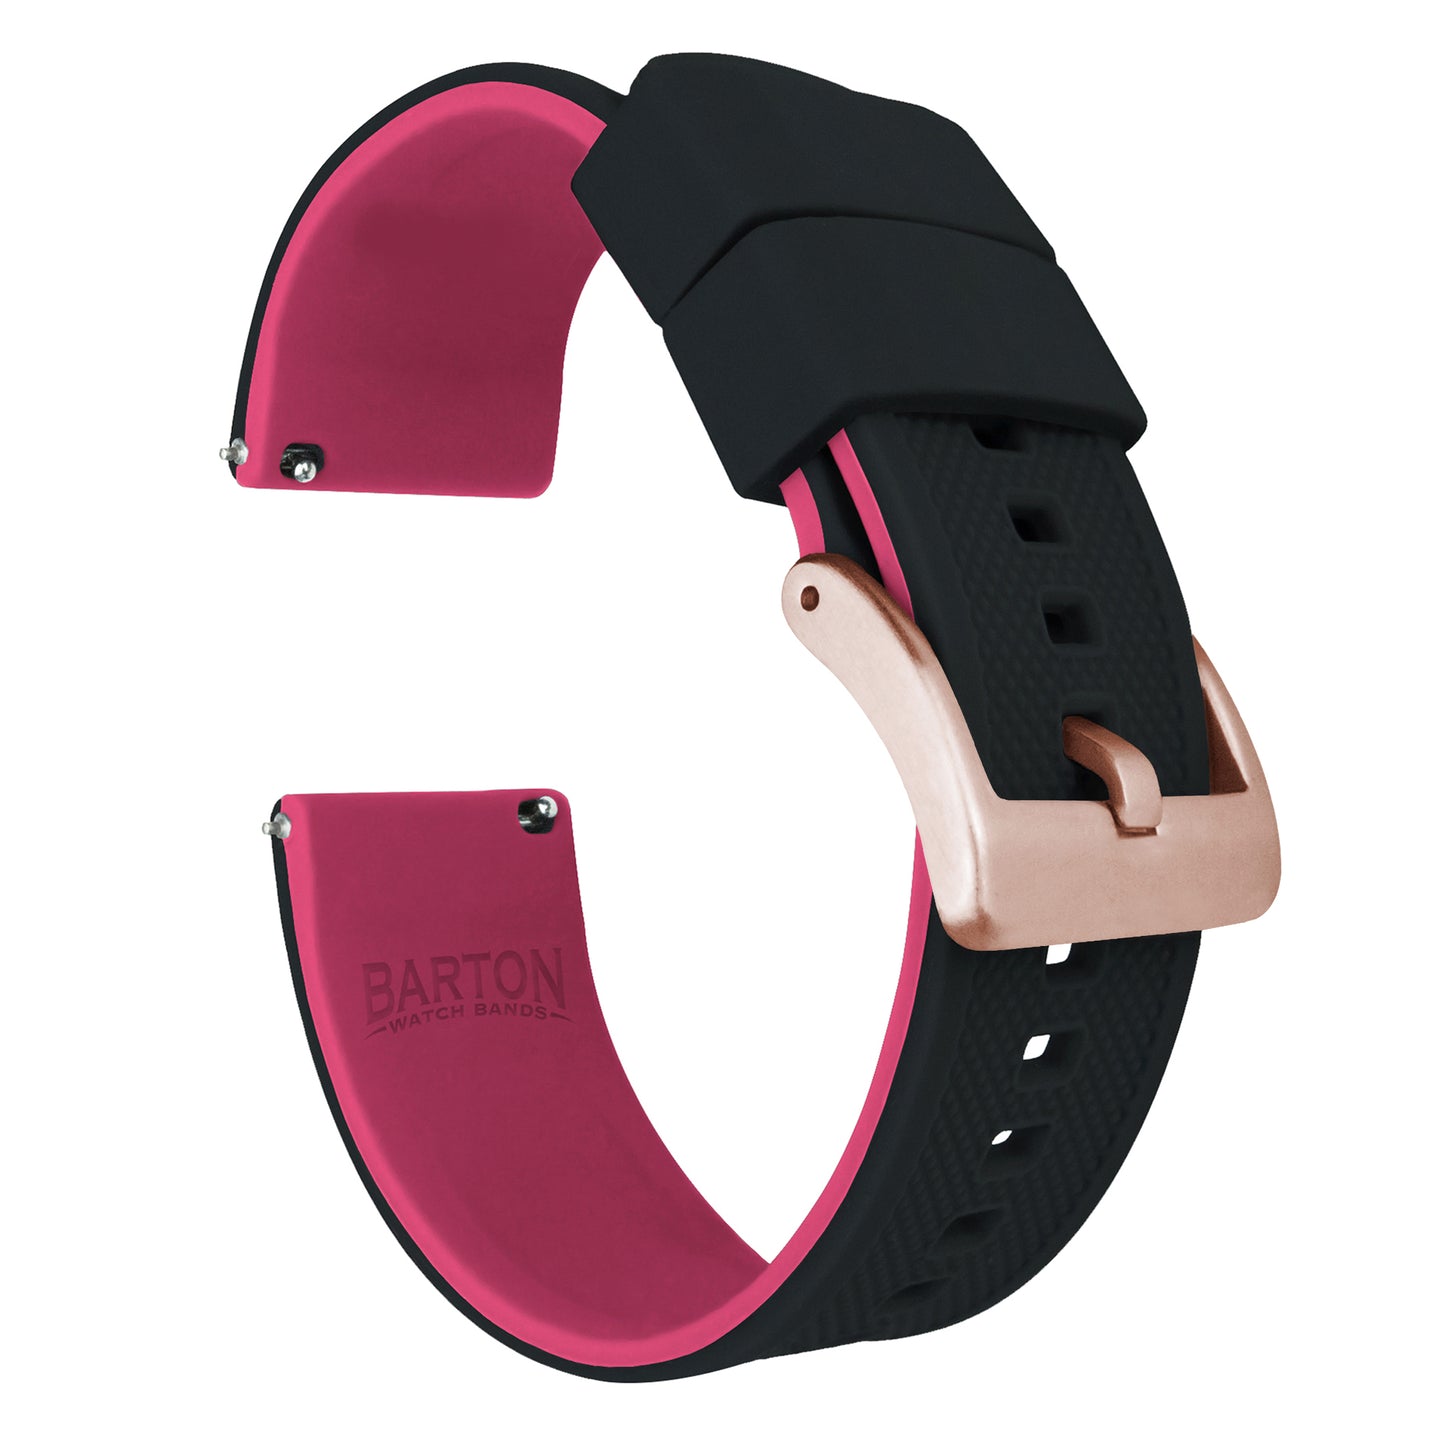 Fossil Sport | Elite Silicone | Black Top / Pink Bottom - Barton Watch Bands